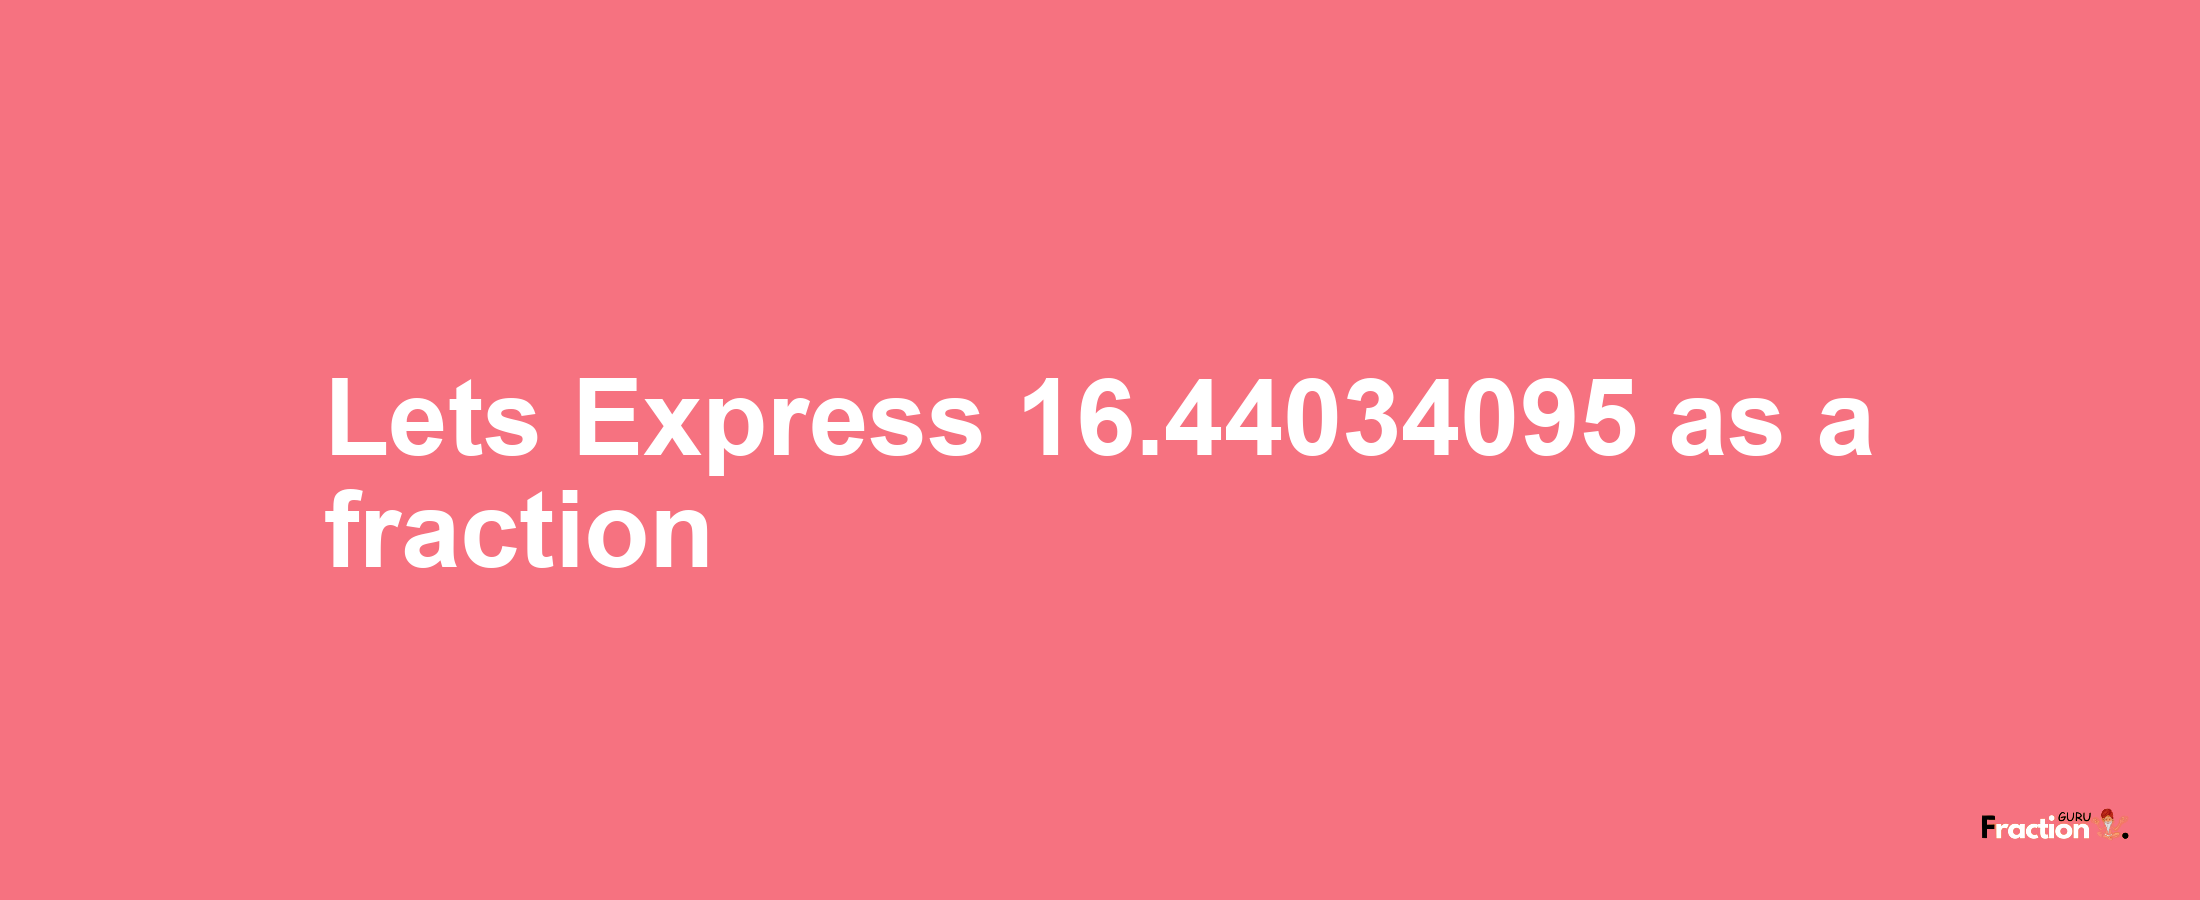 Lets Express 16.44034095 as afraction